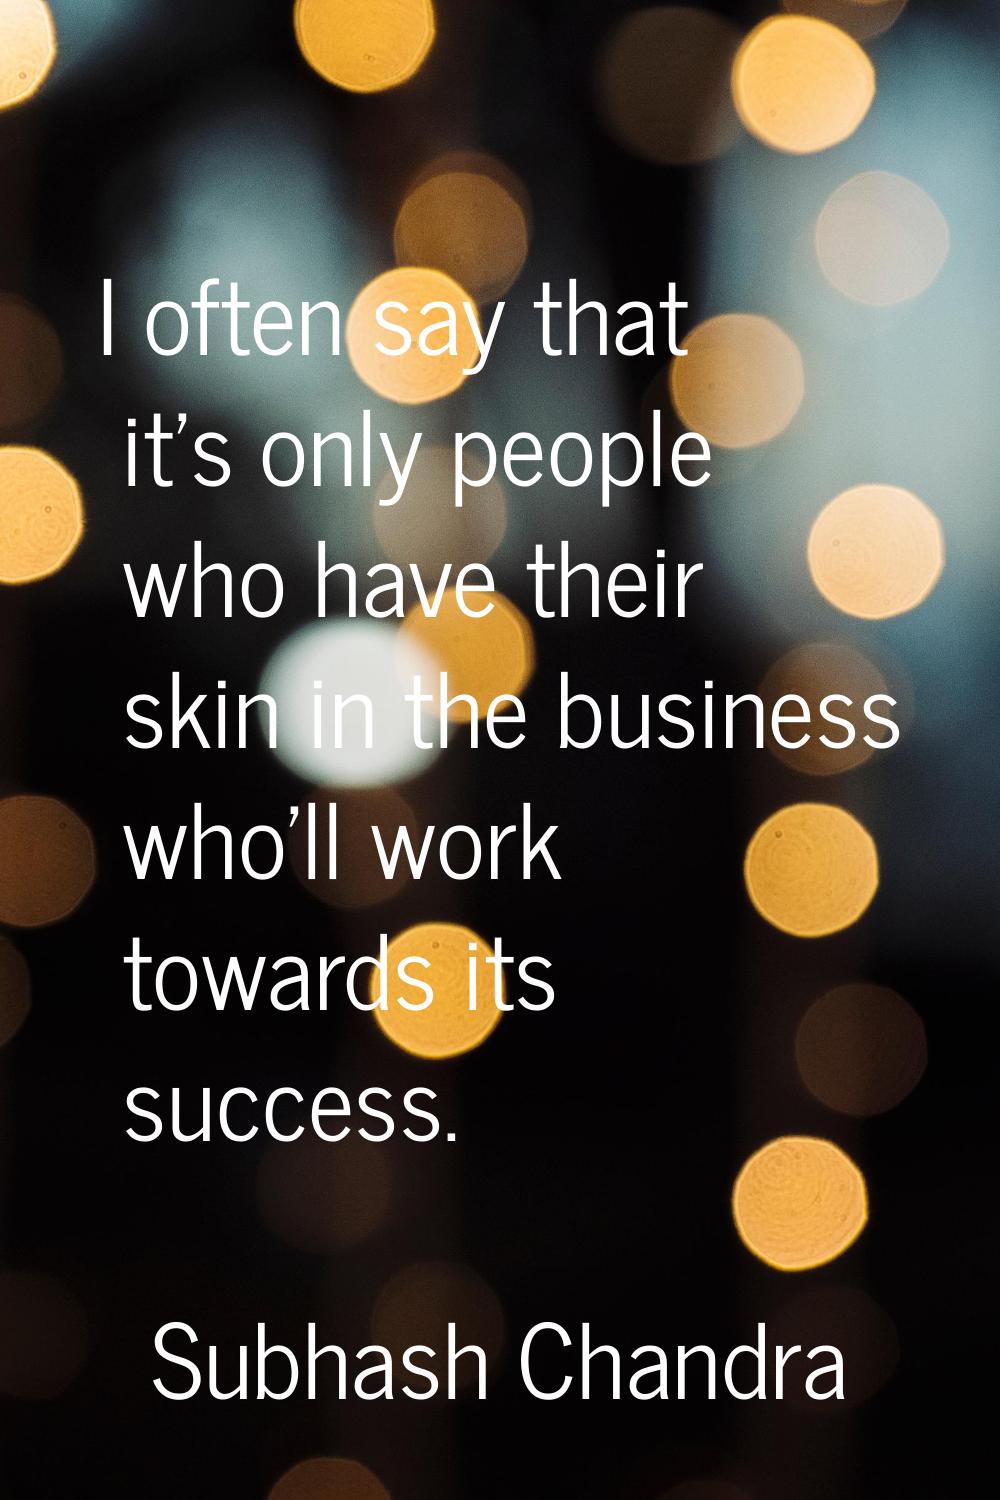 I often say that it's only people who have their skin in the business who'll work towards its succe